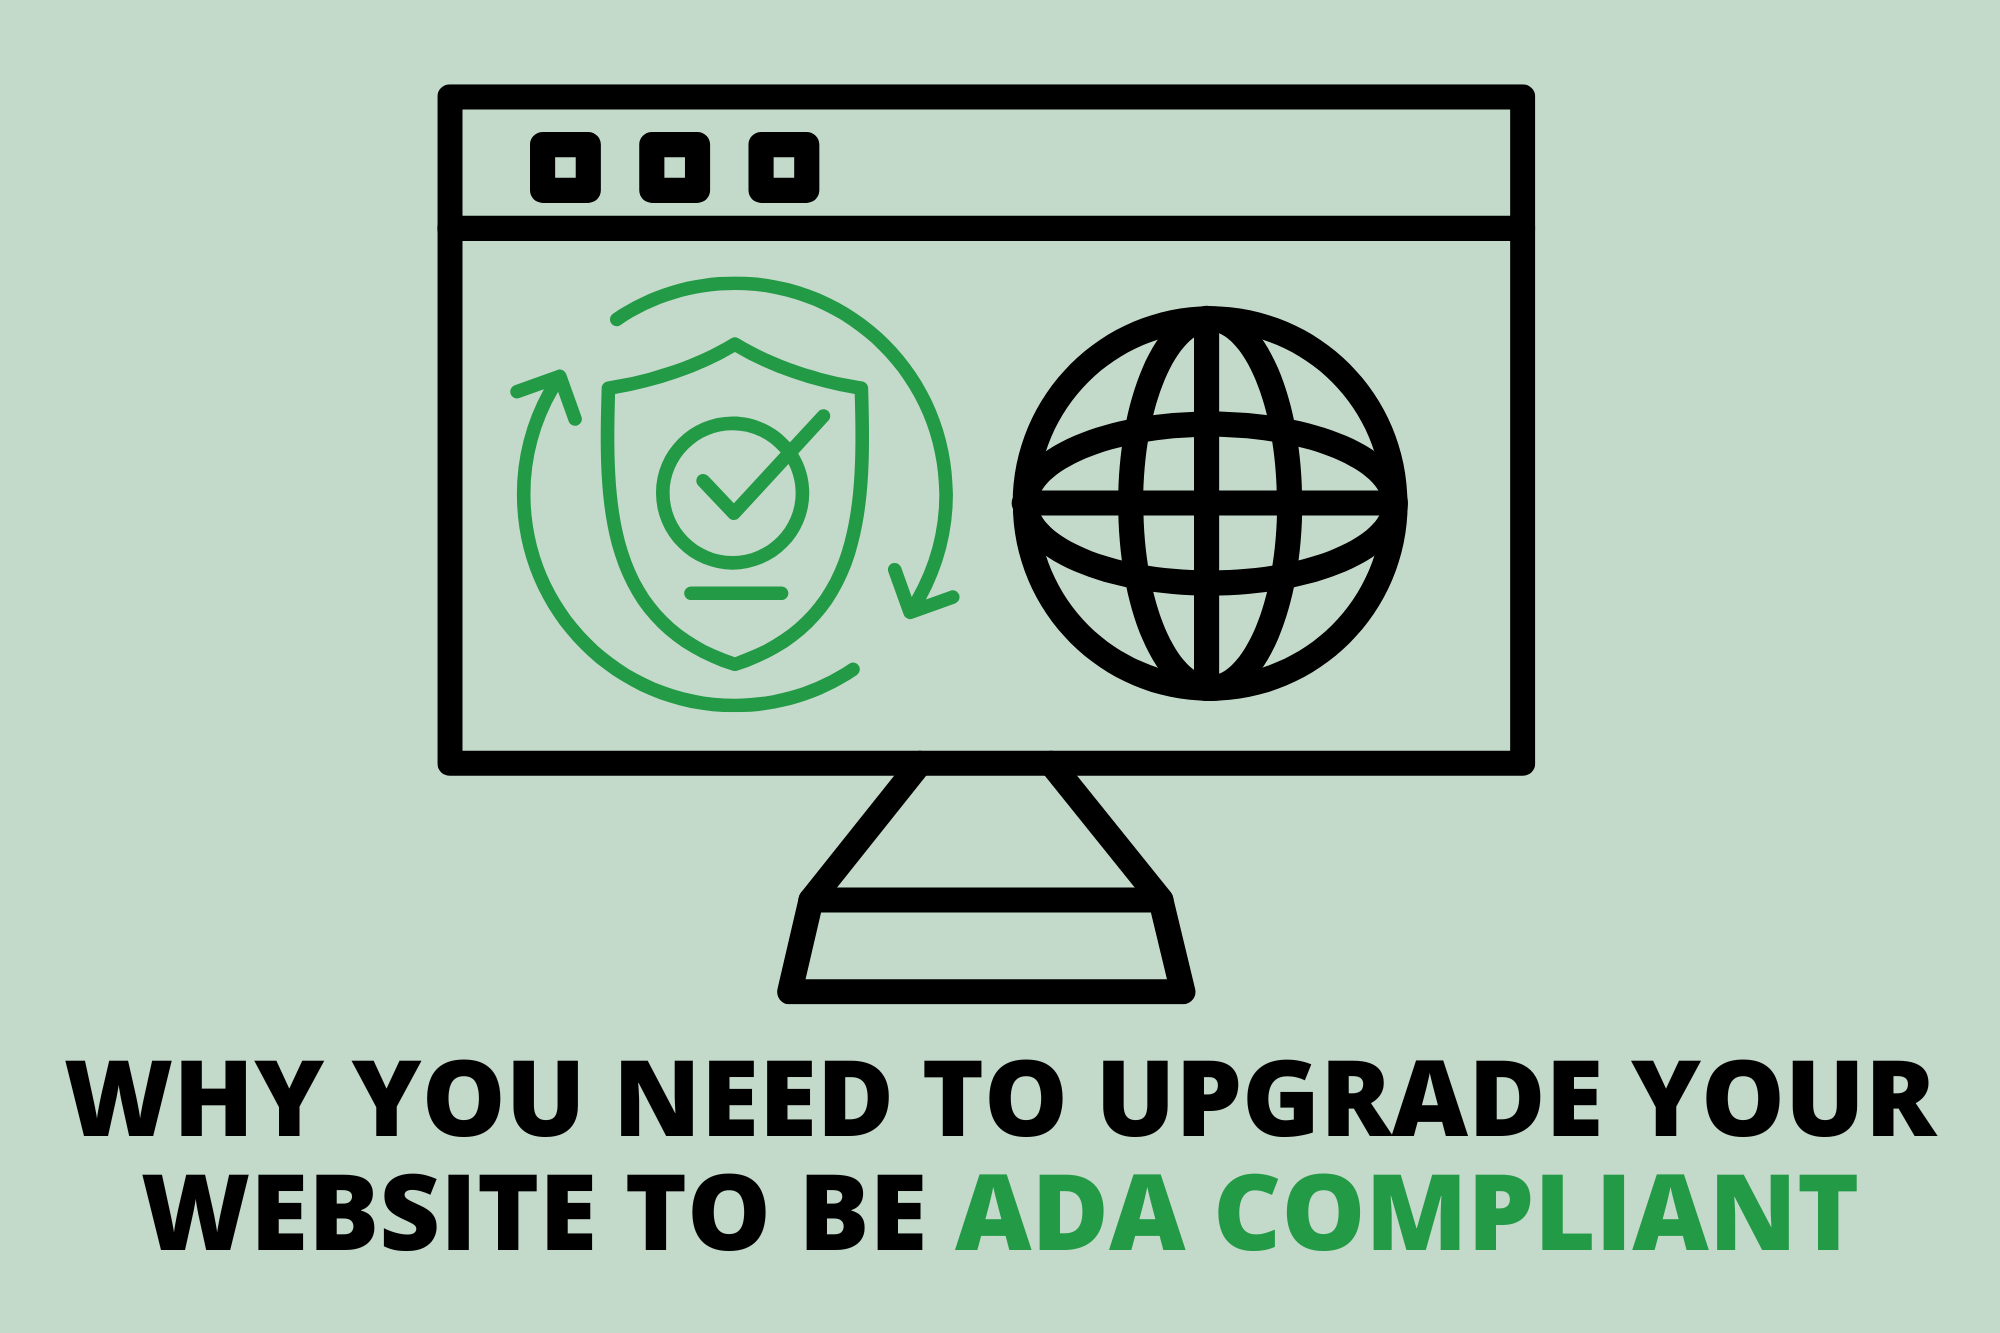 Why You Need To Upgrade Your Website To Be ADA Compliant